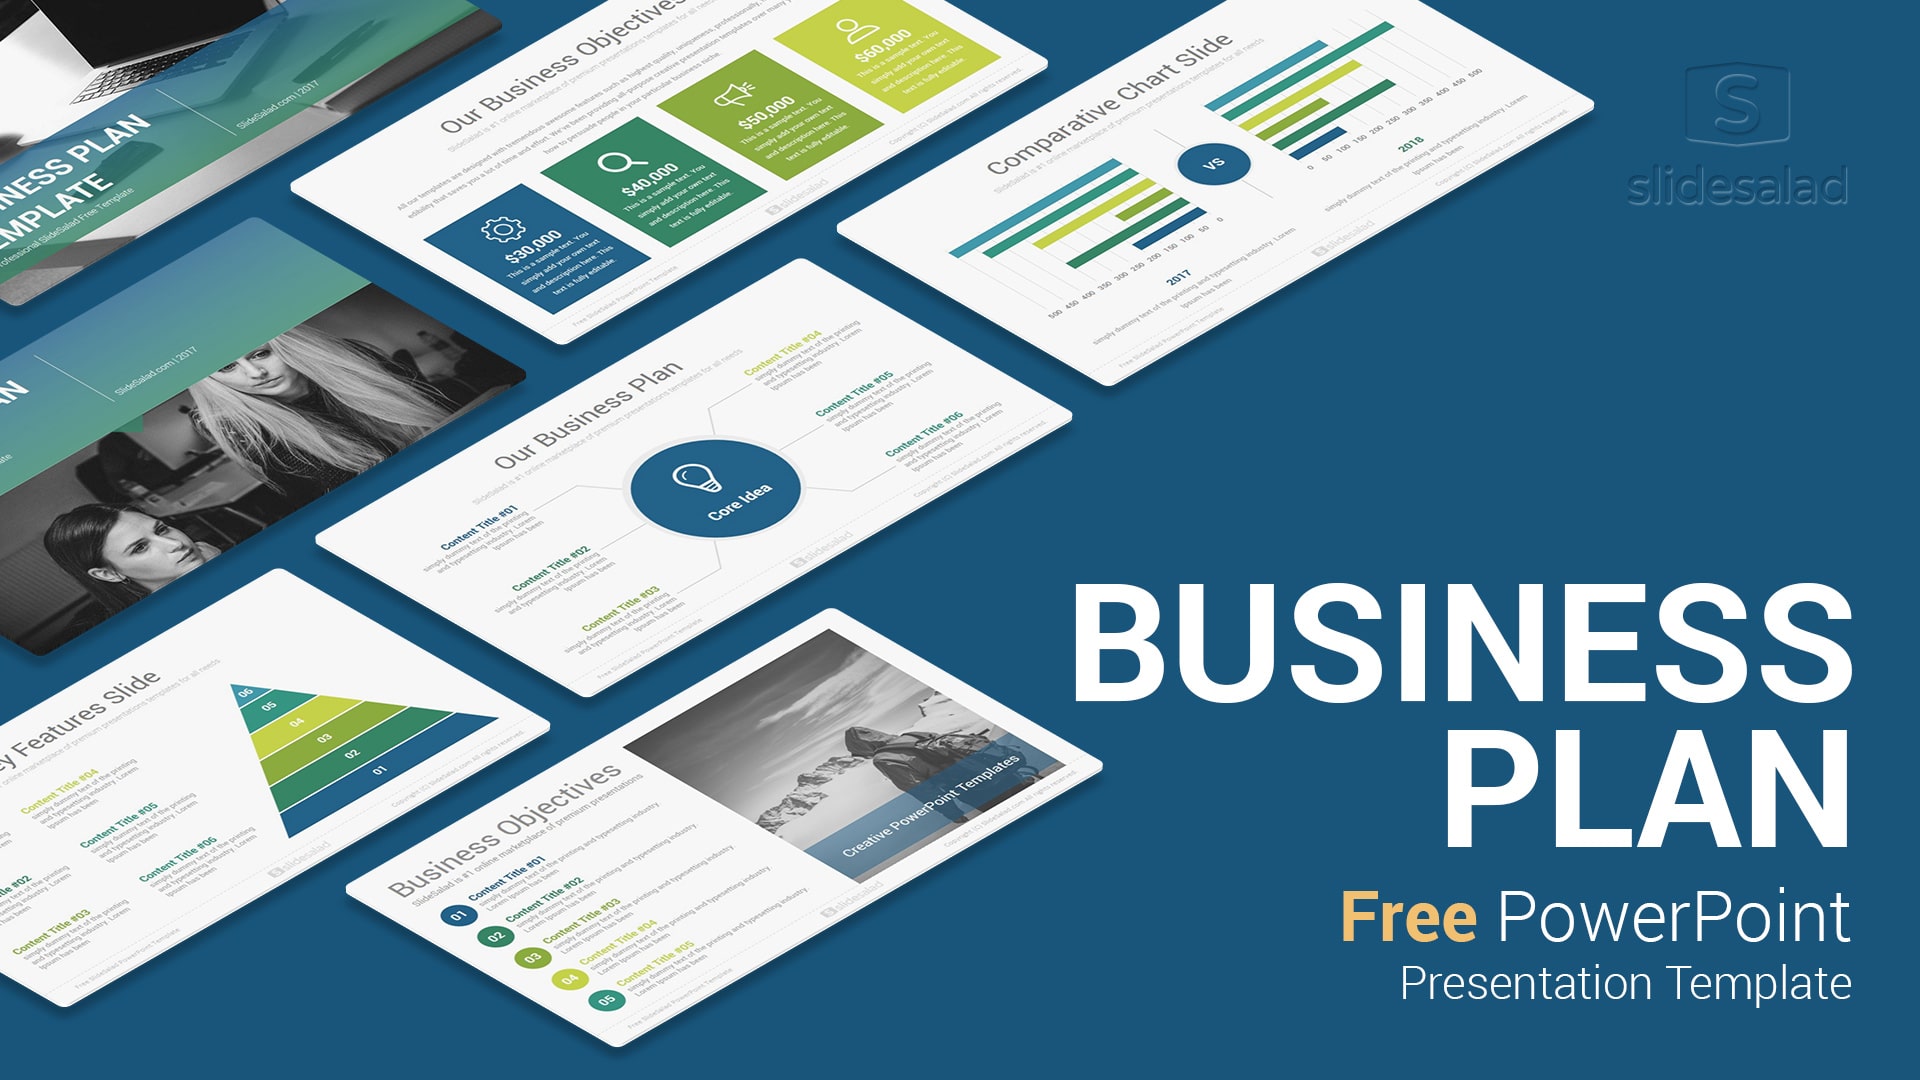 Best Free Presentation Templates Professional Designs 21 Throughout Best Business Presentation Templates Free Download